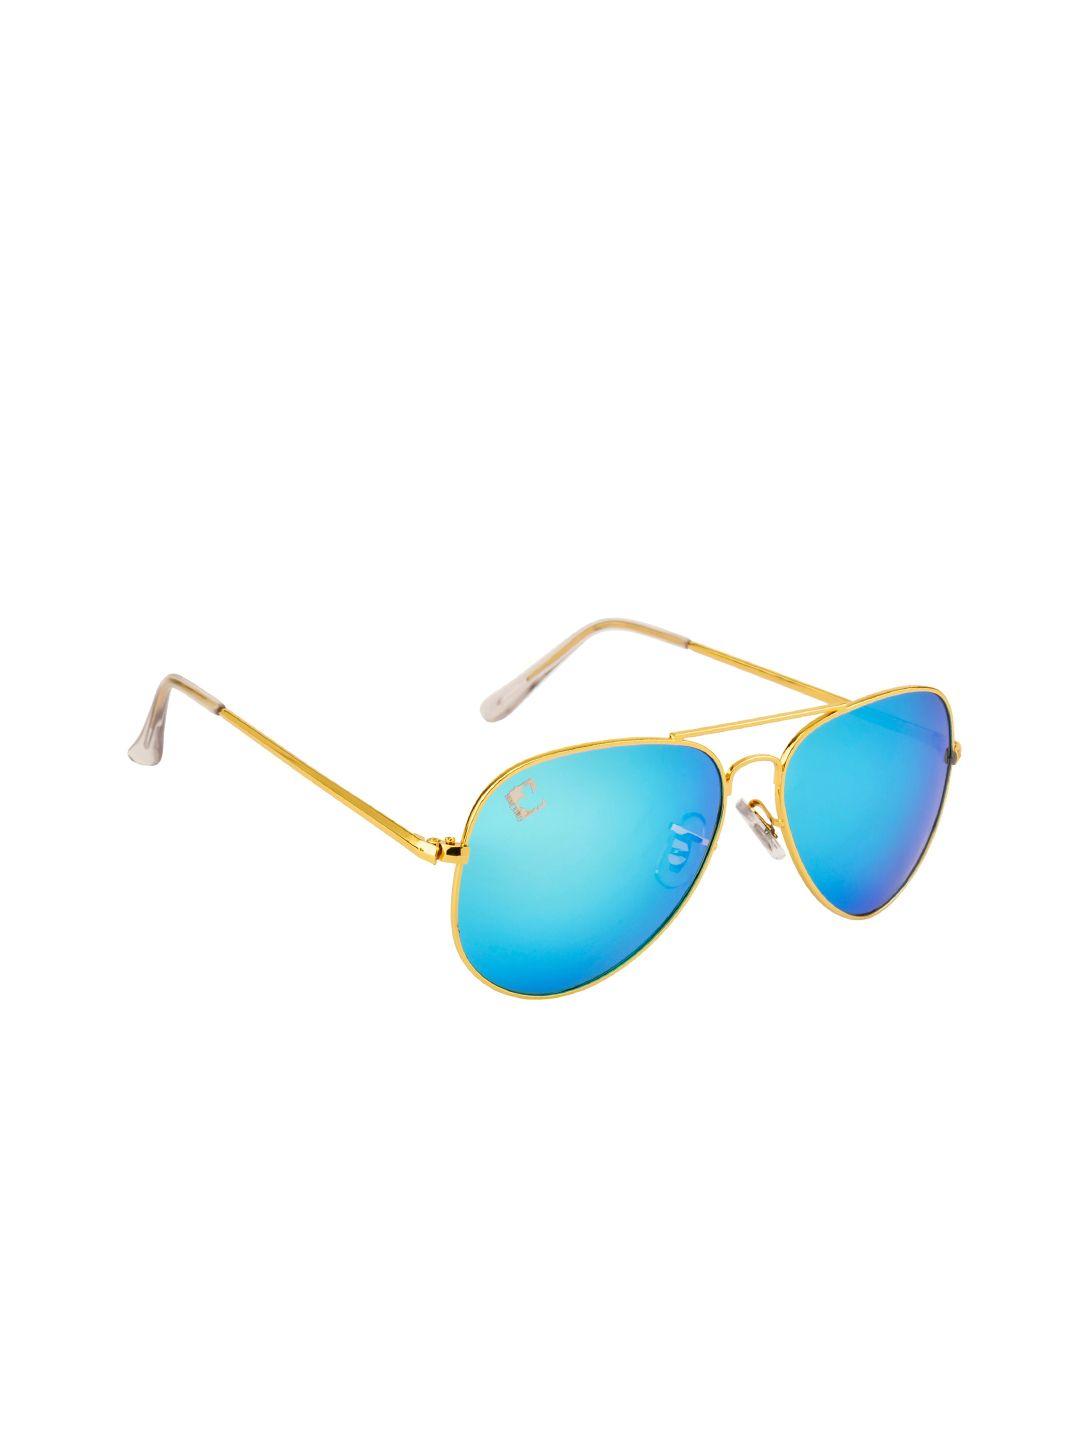 clark n palmer unisex aviator sunglasses with polarised and uv protected lens cnp-sbn-858